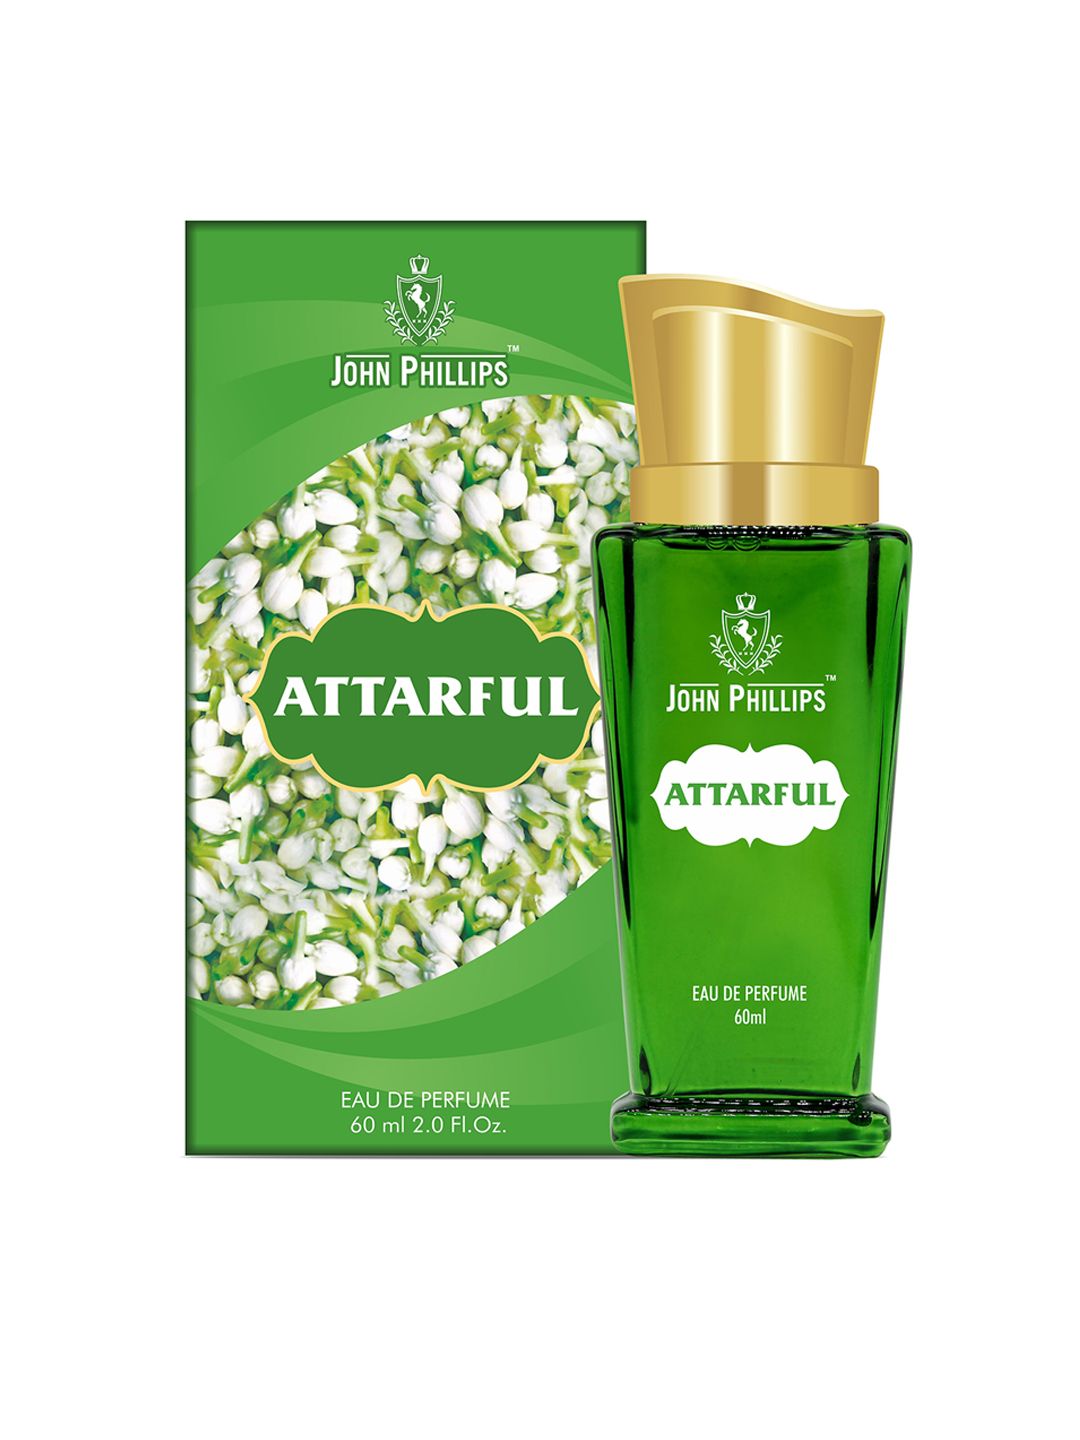 JOHN PHILLIPS Green Perfume and Body Mist Price in India